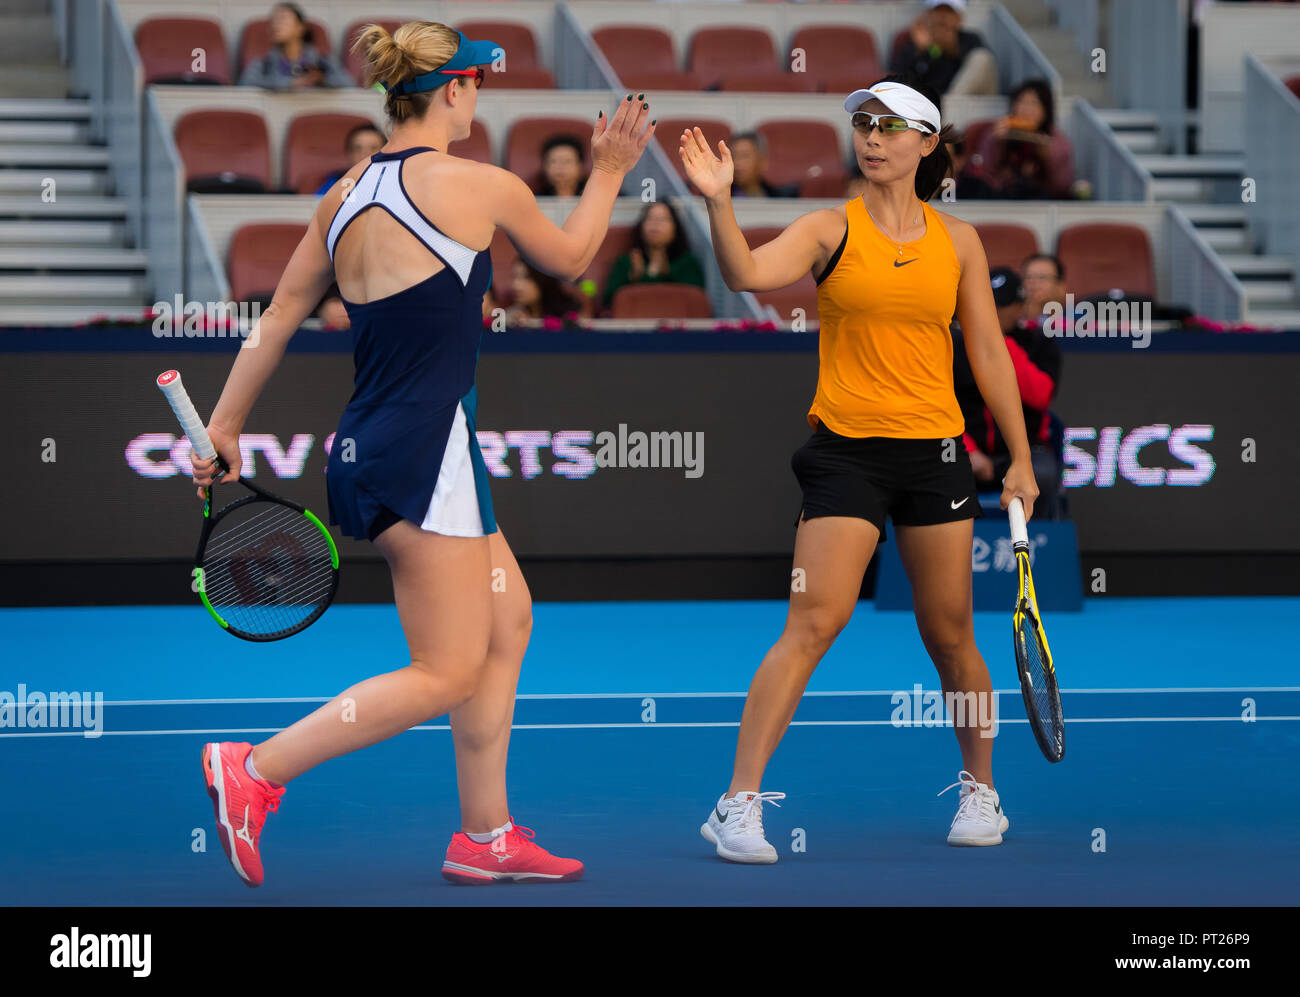 Beijing, China. October 6, 2018 - Gabriela Dabrowski of Canada & Yifan Xu  of China in action during a doubles match at the 2018 China Open WTA  Premier Mandatory tennis tournament Credit: